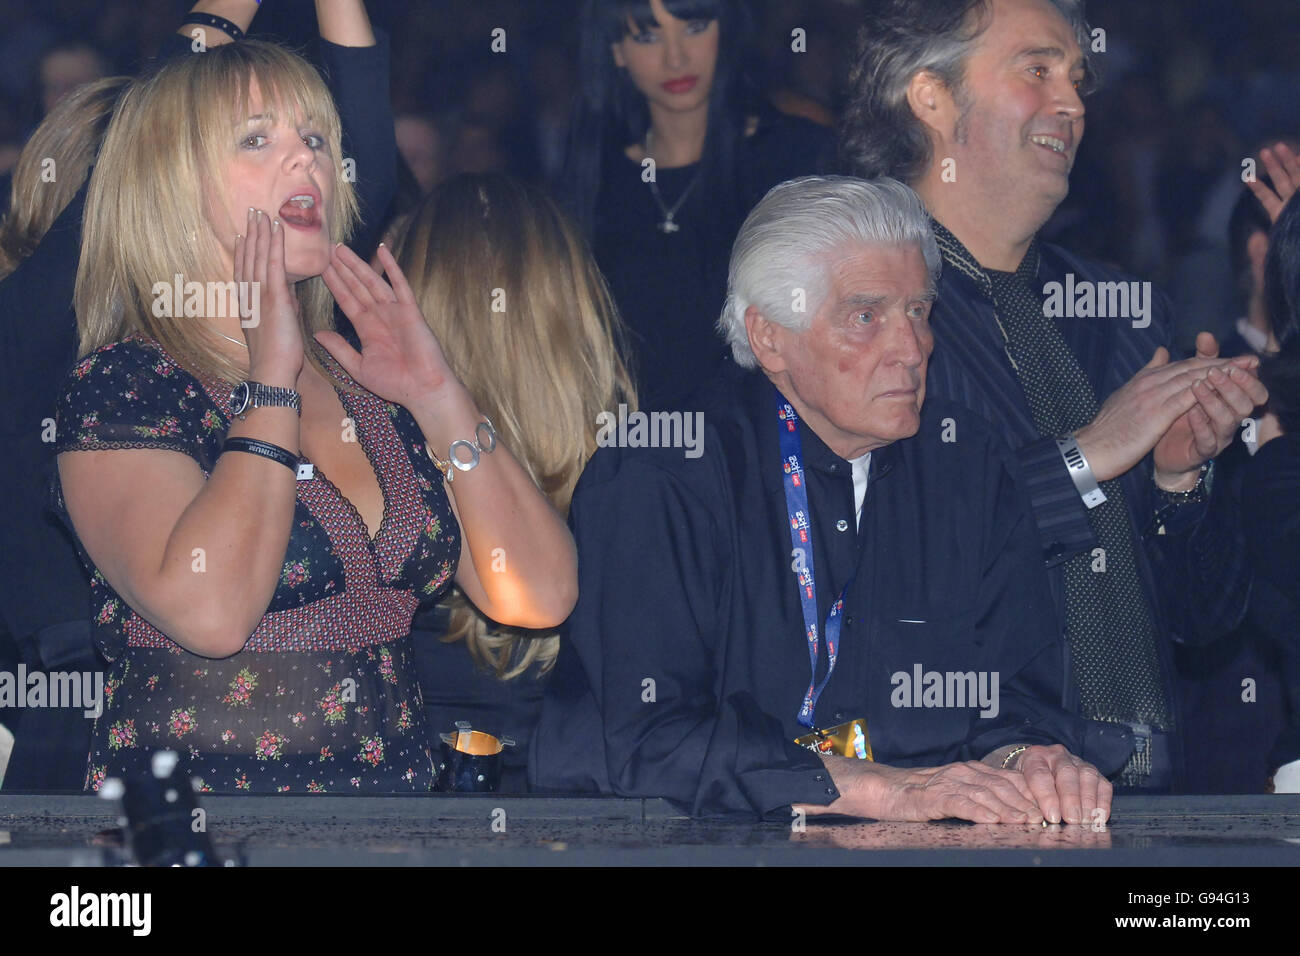 Paul Weller's father looks on with Coronation Street actress Sally Lindsay as Paul Weller performs on stage at the Brit Awards 2006, at Earls Court, west London, Wednesday 15 February 2006. See PA Story SHOWBIZ Brits. PRESS ASSOCIATION Photo. Photo credit should read: Yui Mok/PA Stock Photo